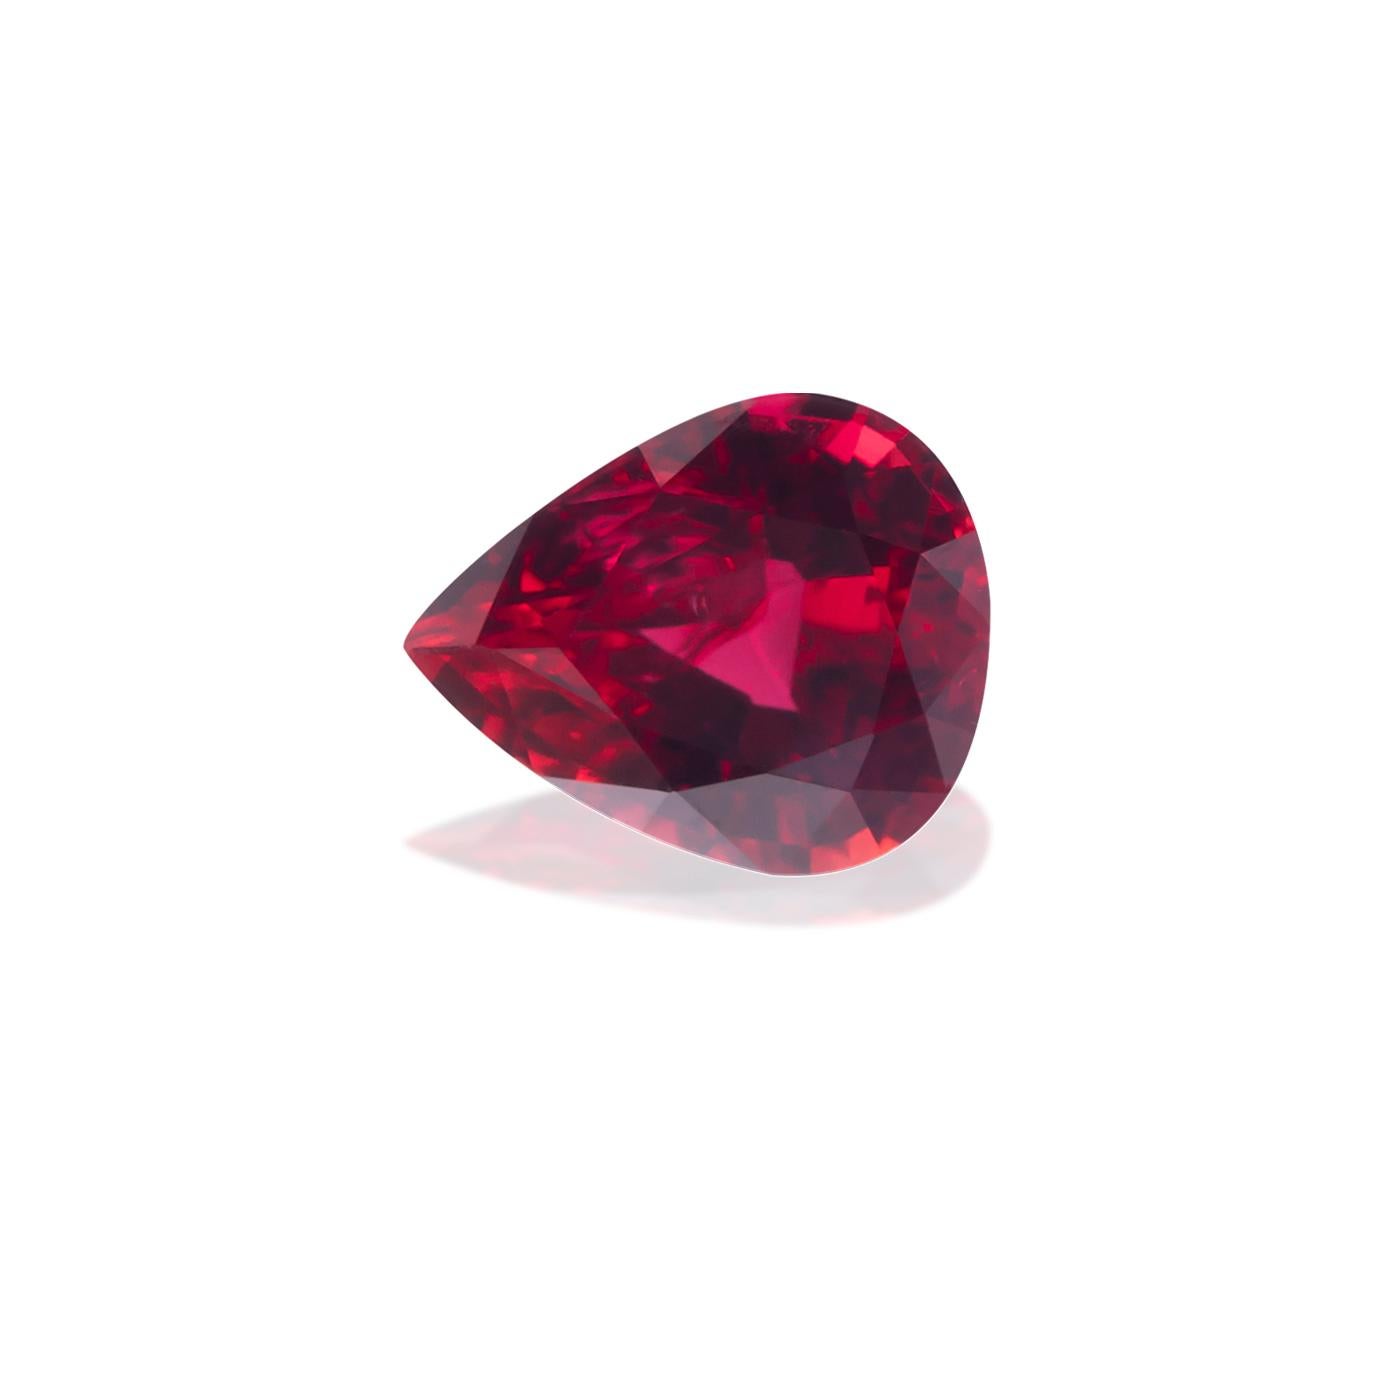 Ruby
Pear Shape
Color Red
Brilliant Cut
Dimension 5.43x6.50x3.41
Weight 0.895 cts.
Country of Origin Mozambique

GEM RARITY: UNEARTHLY THE RAREST GEM

Witness the unique journey of colored gemstones, experience a new level of iconic statements and